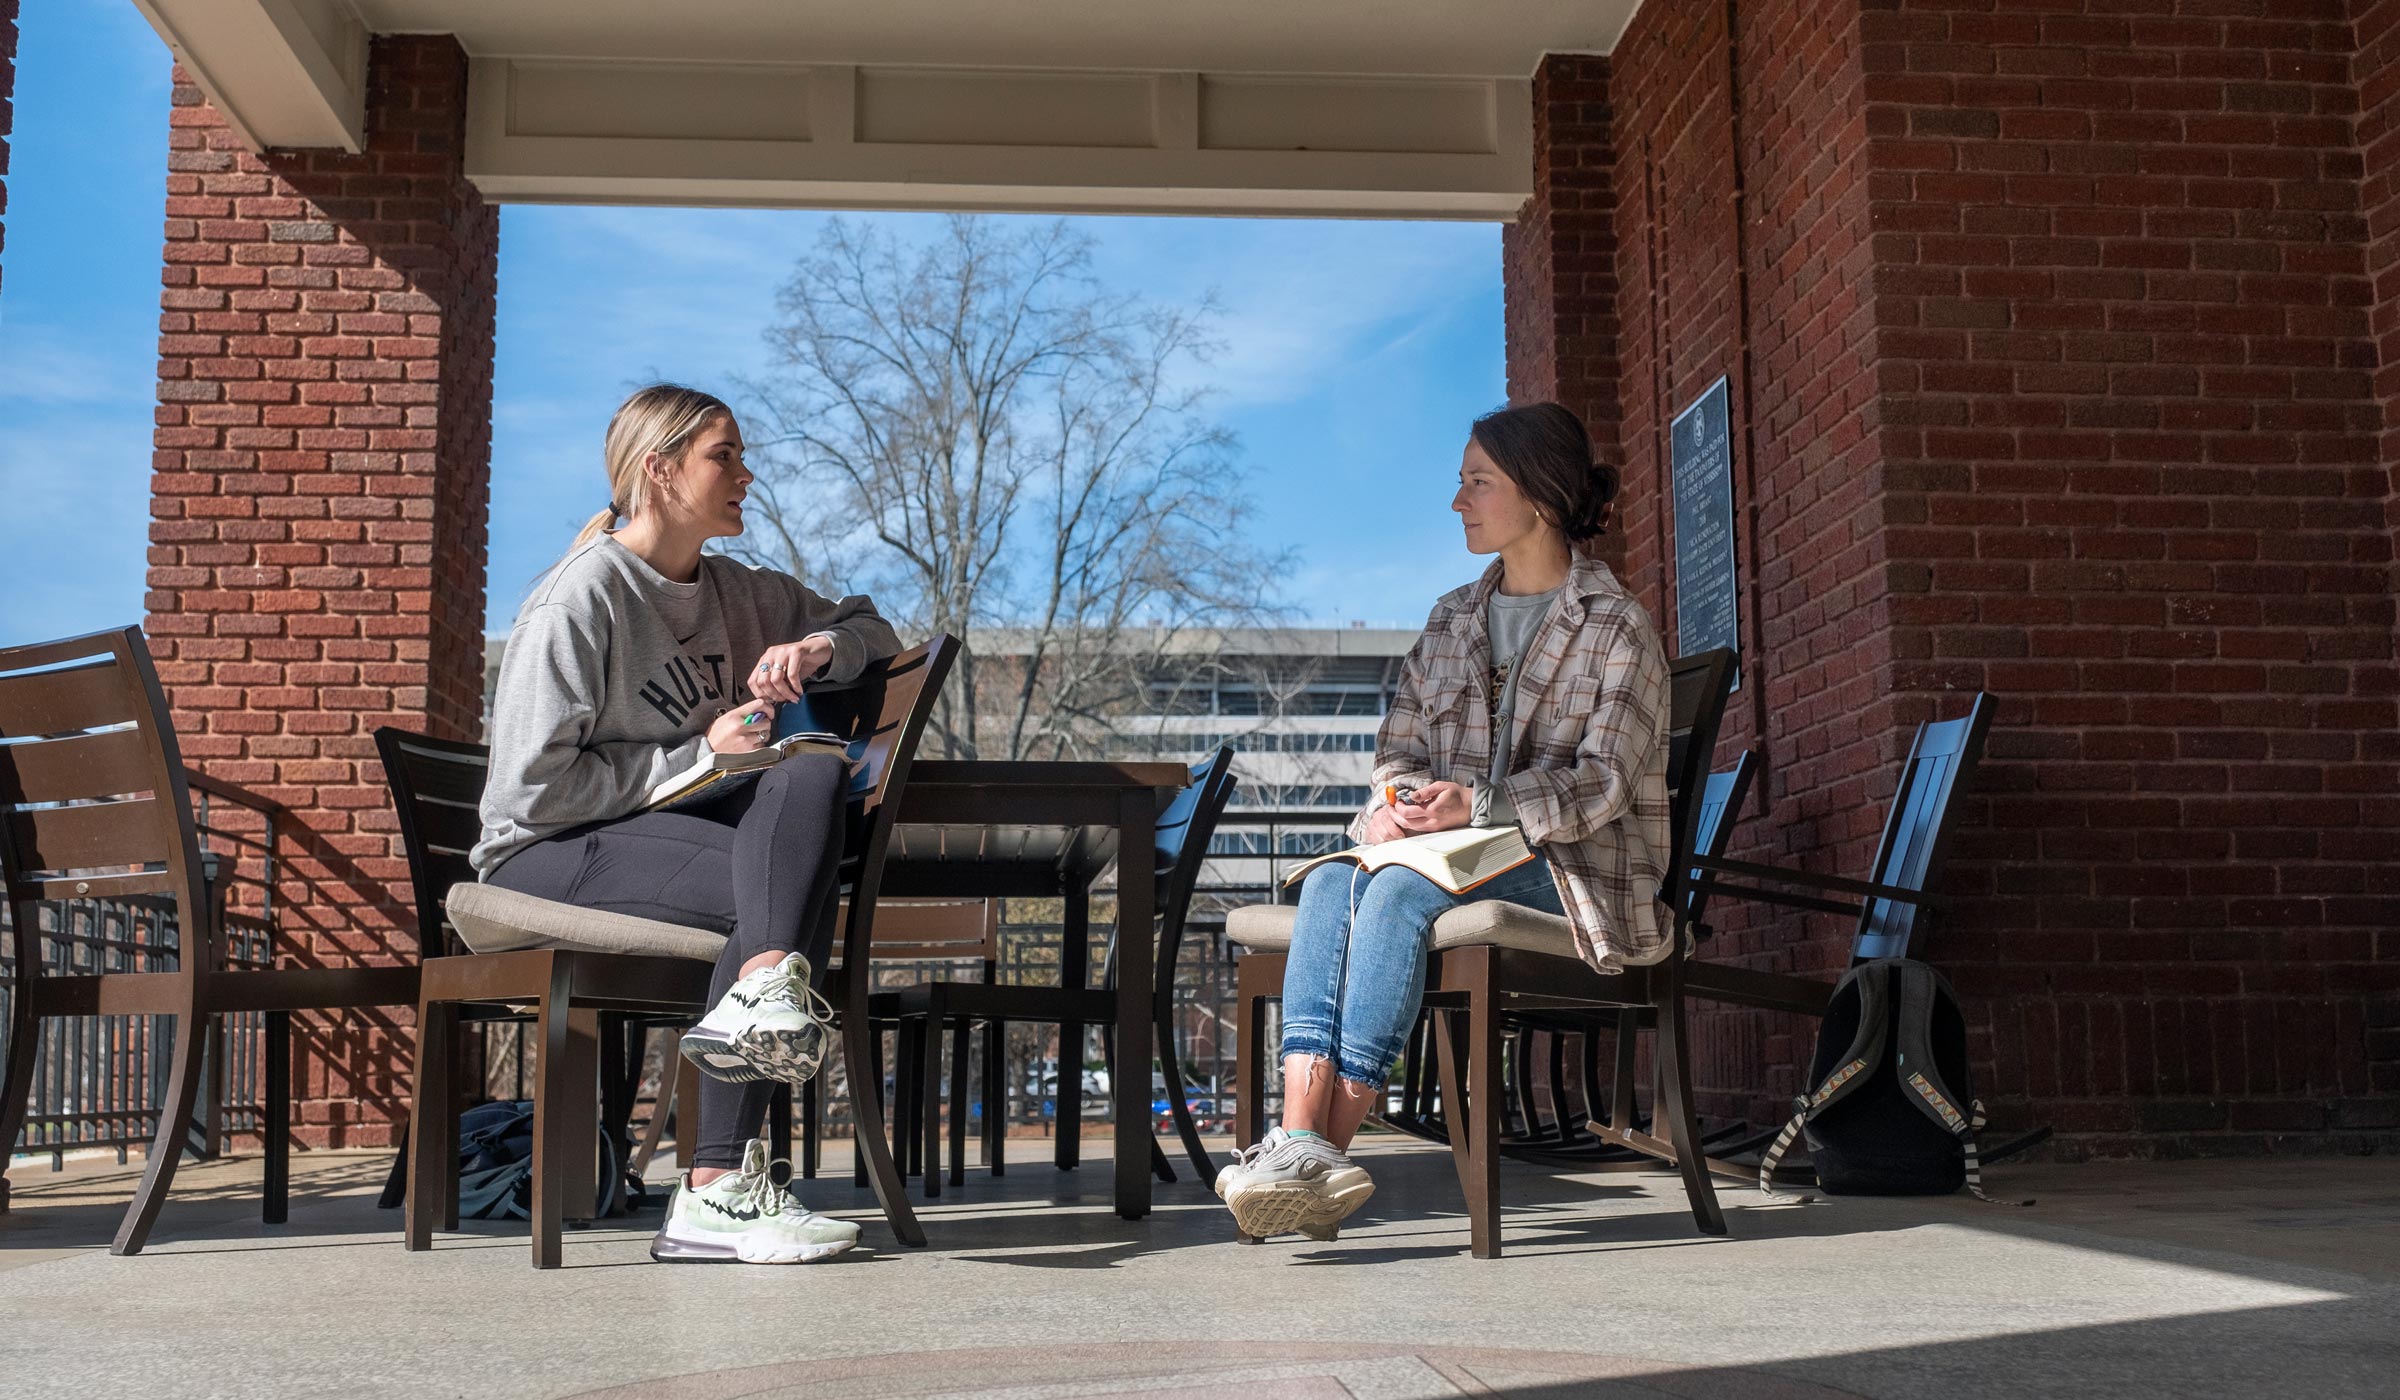 Two students sit and visit at a table on the front porch of the YMCA building, with blue sky showing beyond.